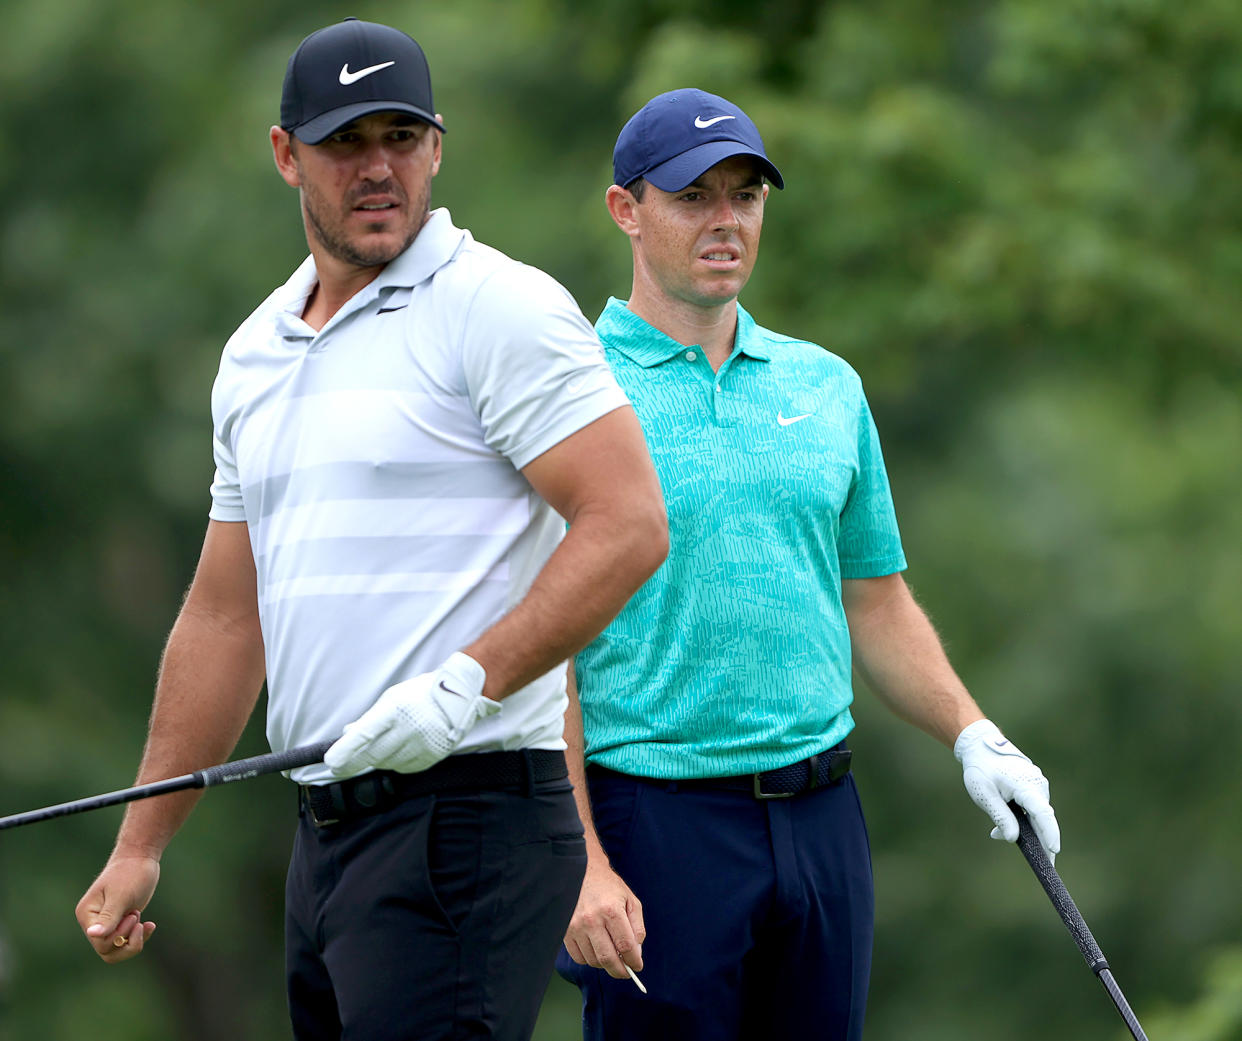 Brooks Koepka's Post About Wife Jena Likely Wasn't the Dig at Rory McIlroy Fans Made It Out to Be